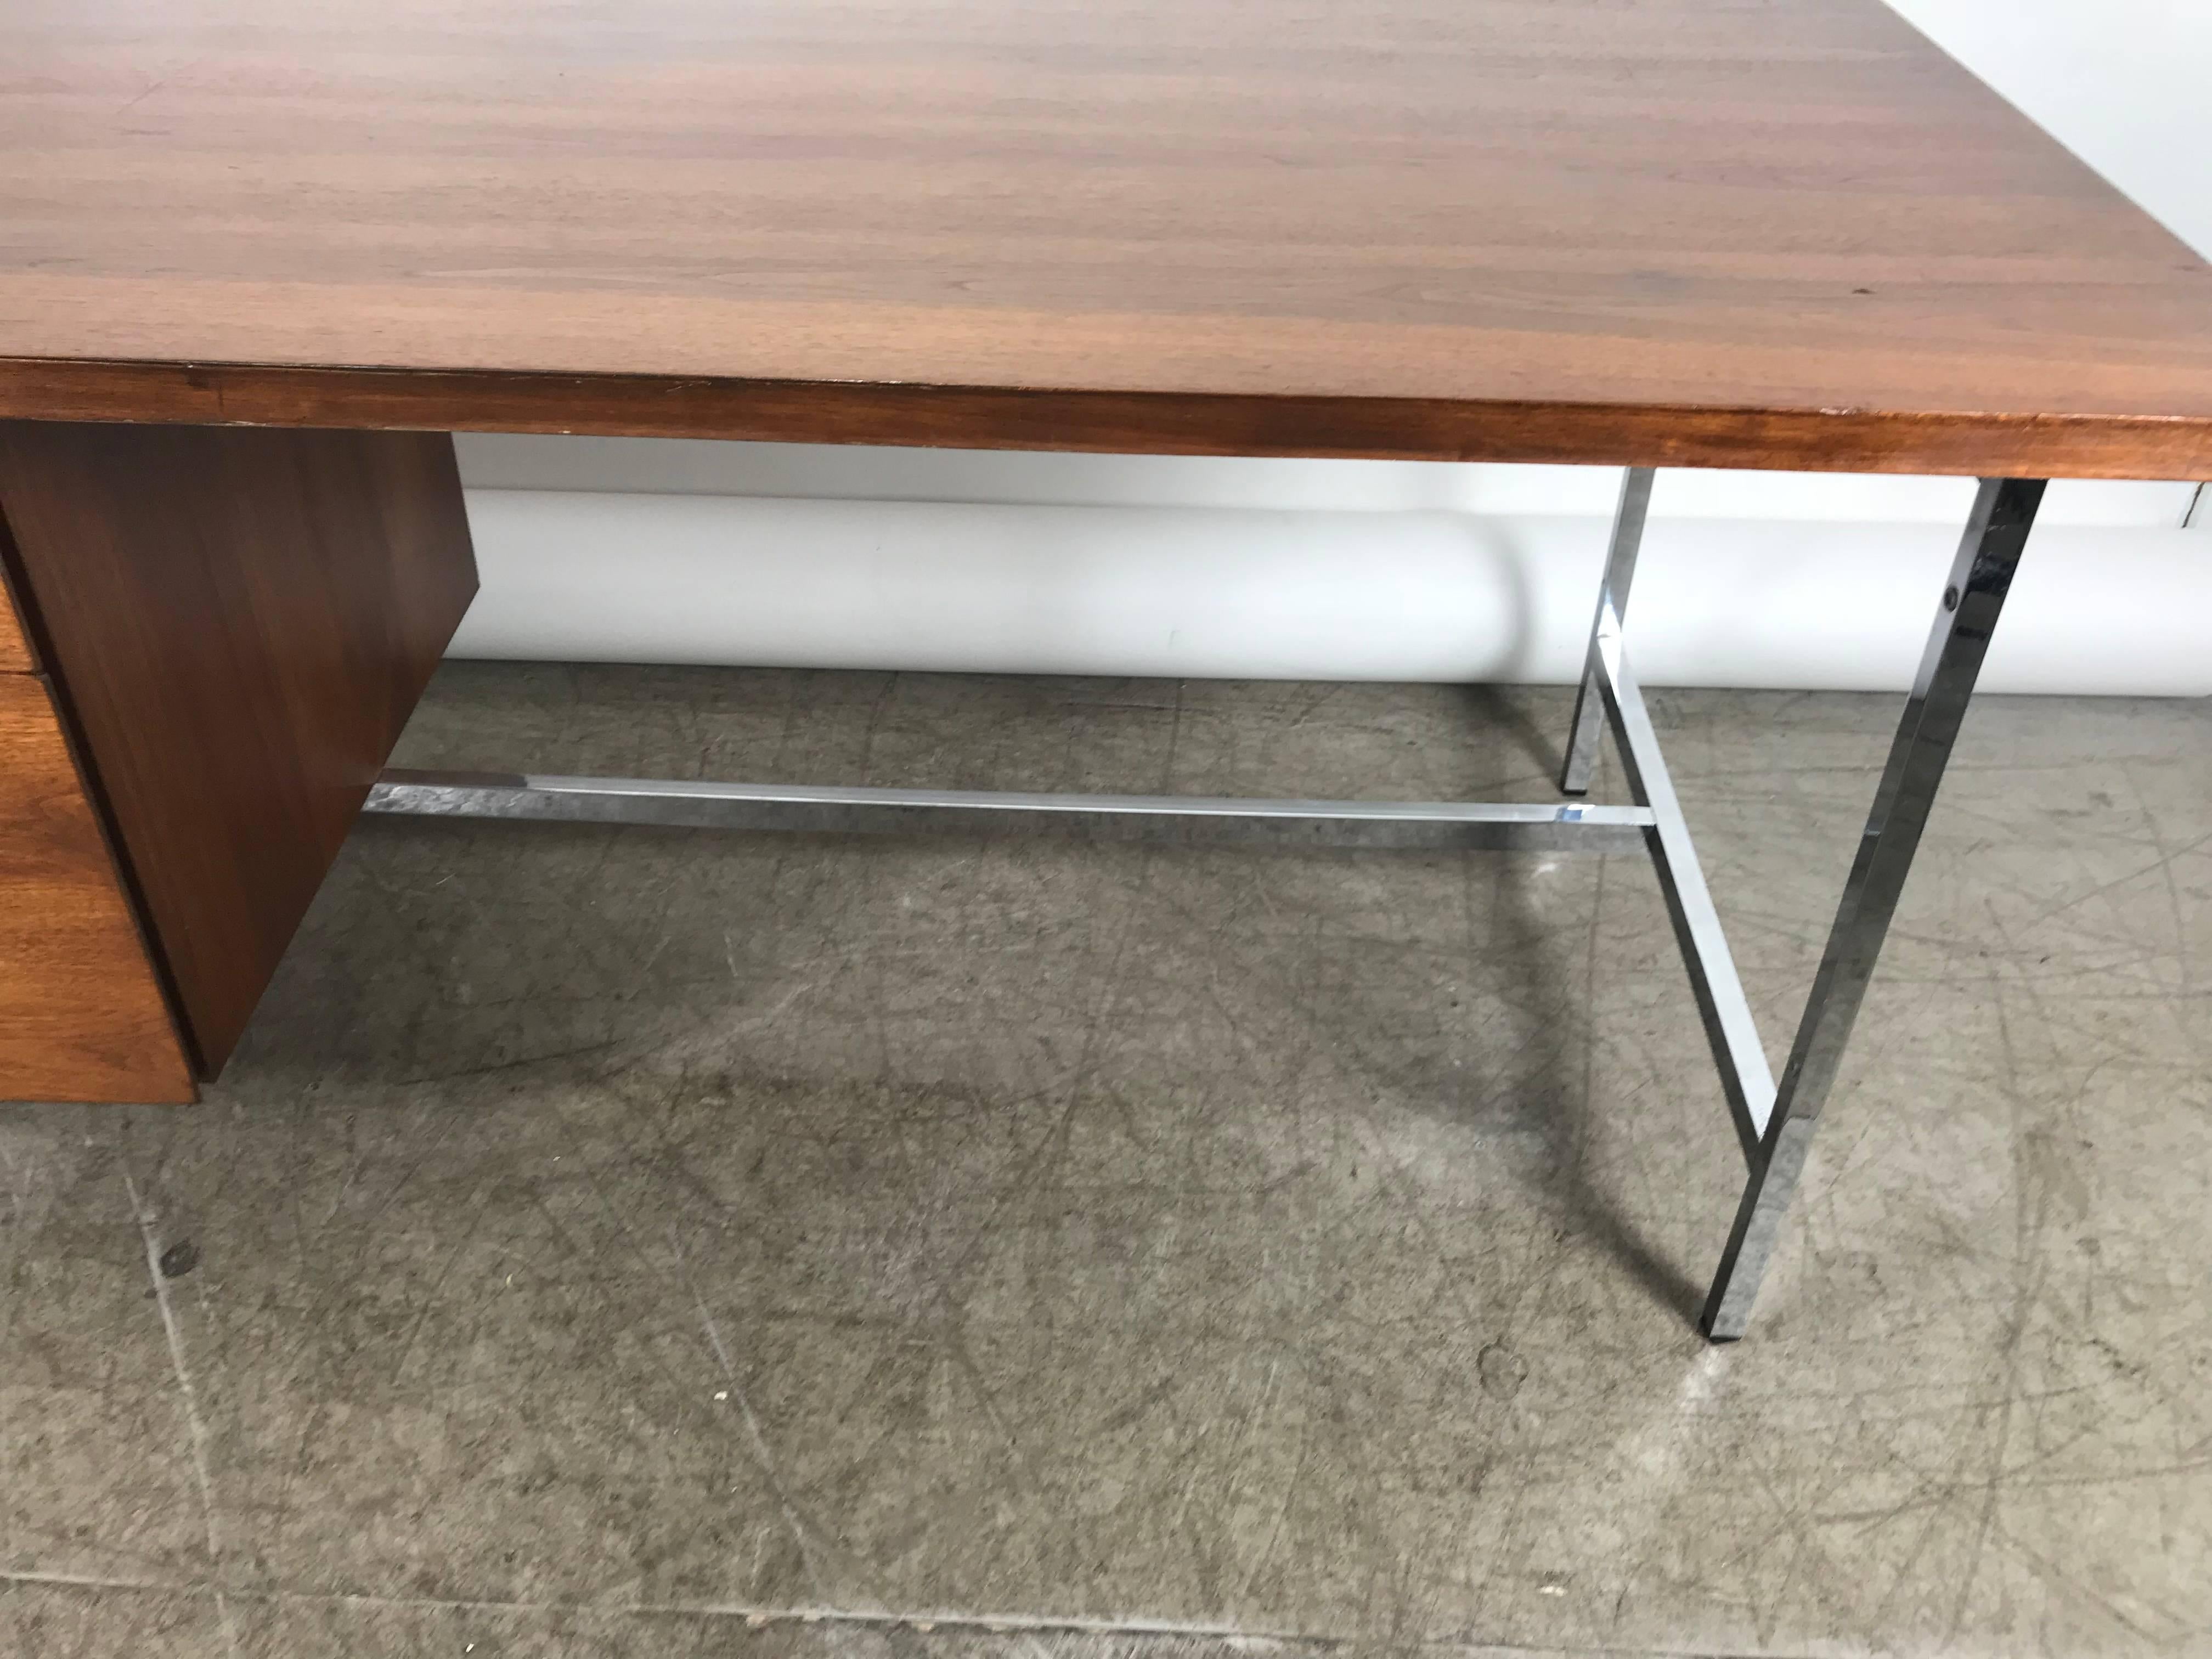 Classic Midcentury Walnut and Chrome Florence Knoll Desk Knoll In Good Condition For Sale In Buffalo, NY